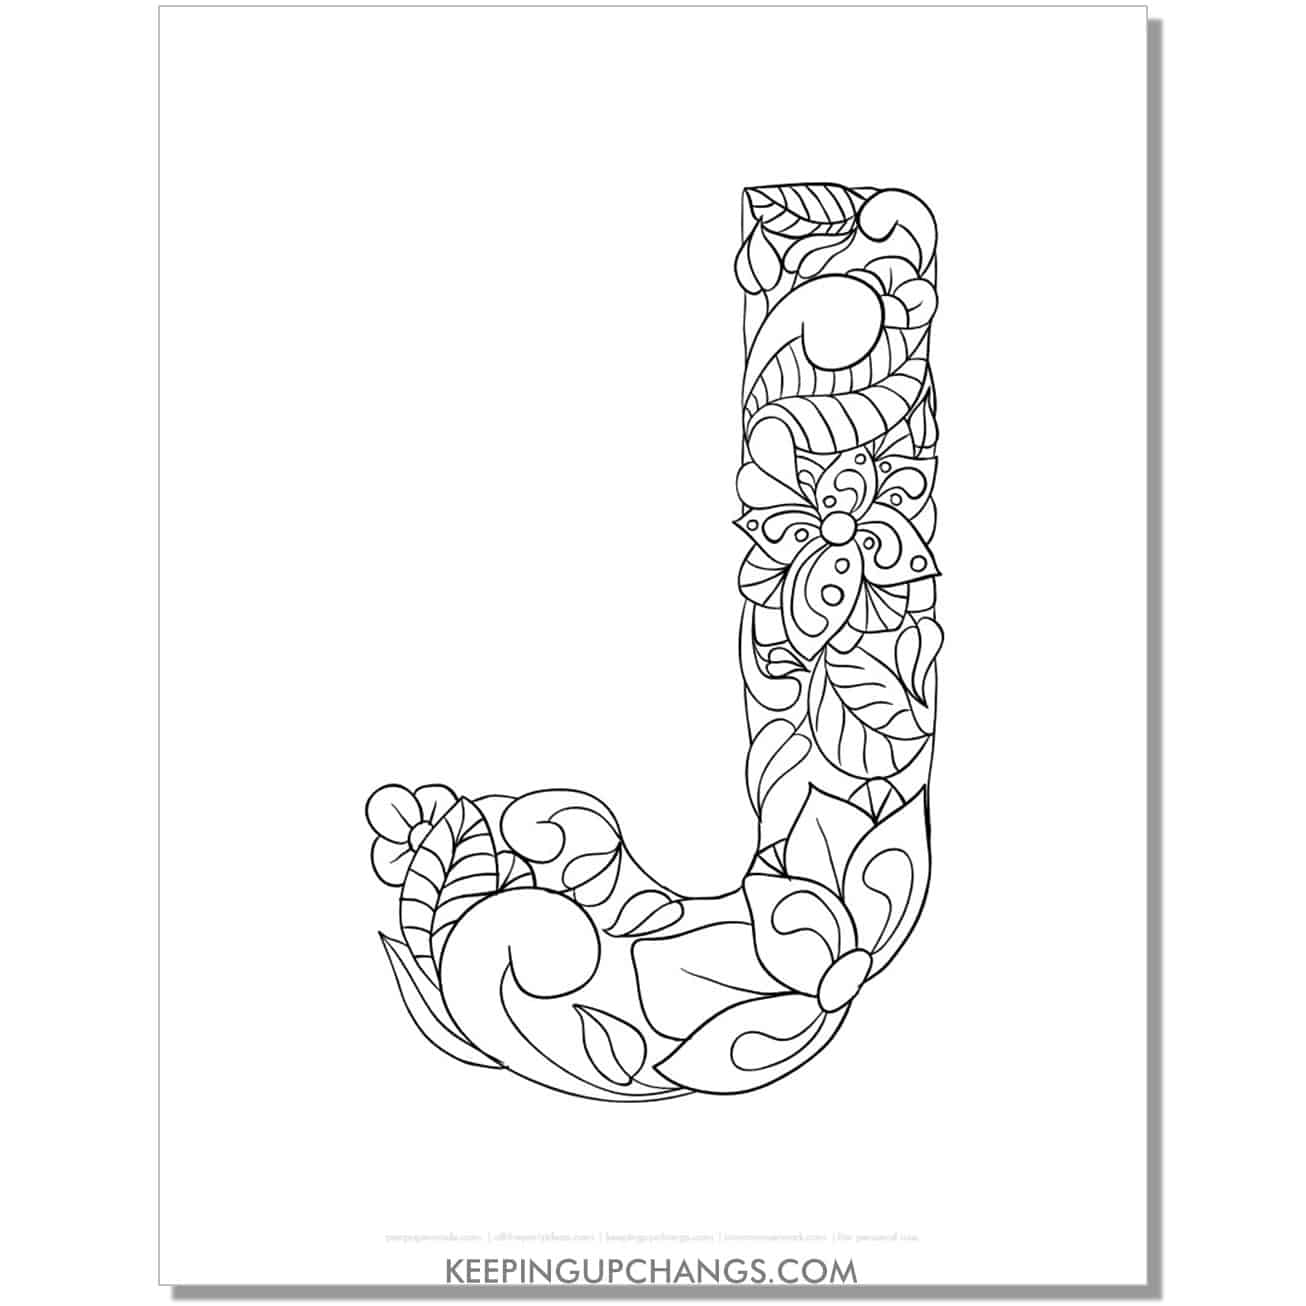 free abc j to color, complicated mandala zentangle for adults.